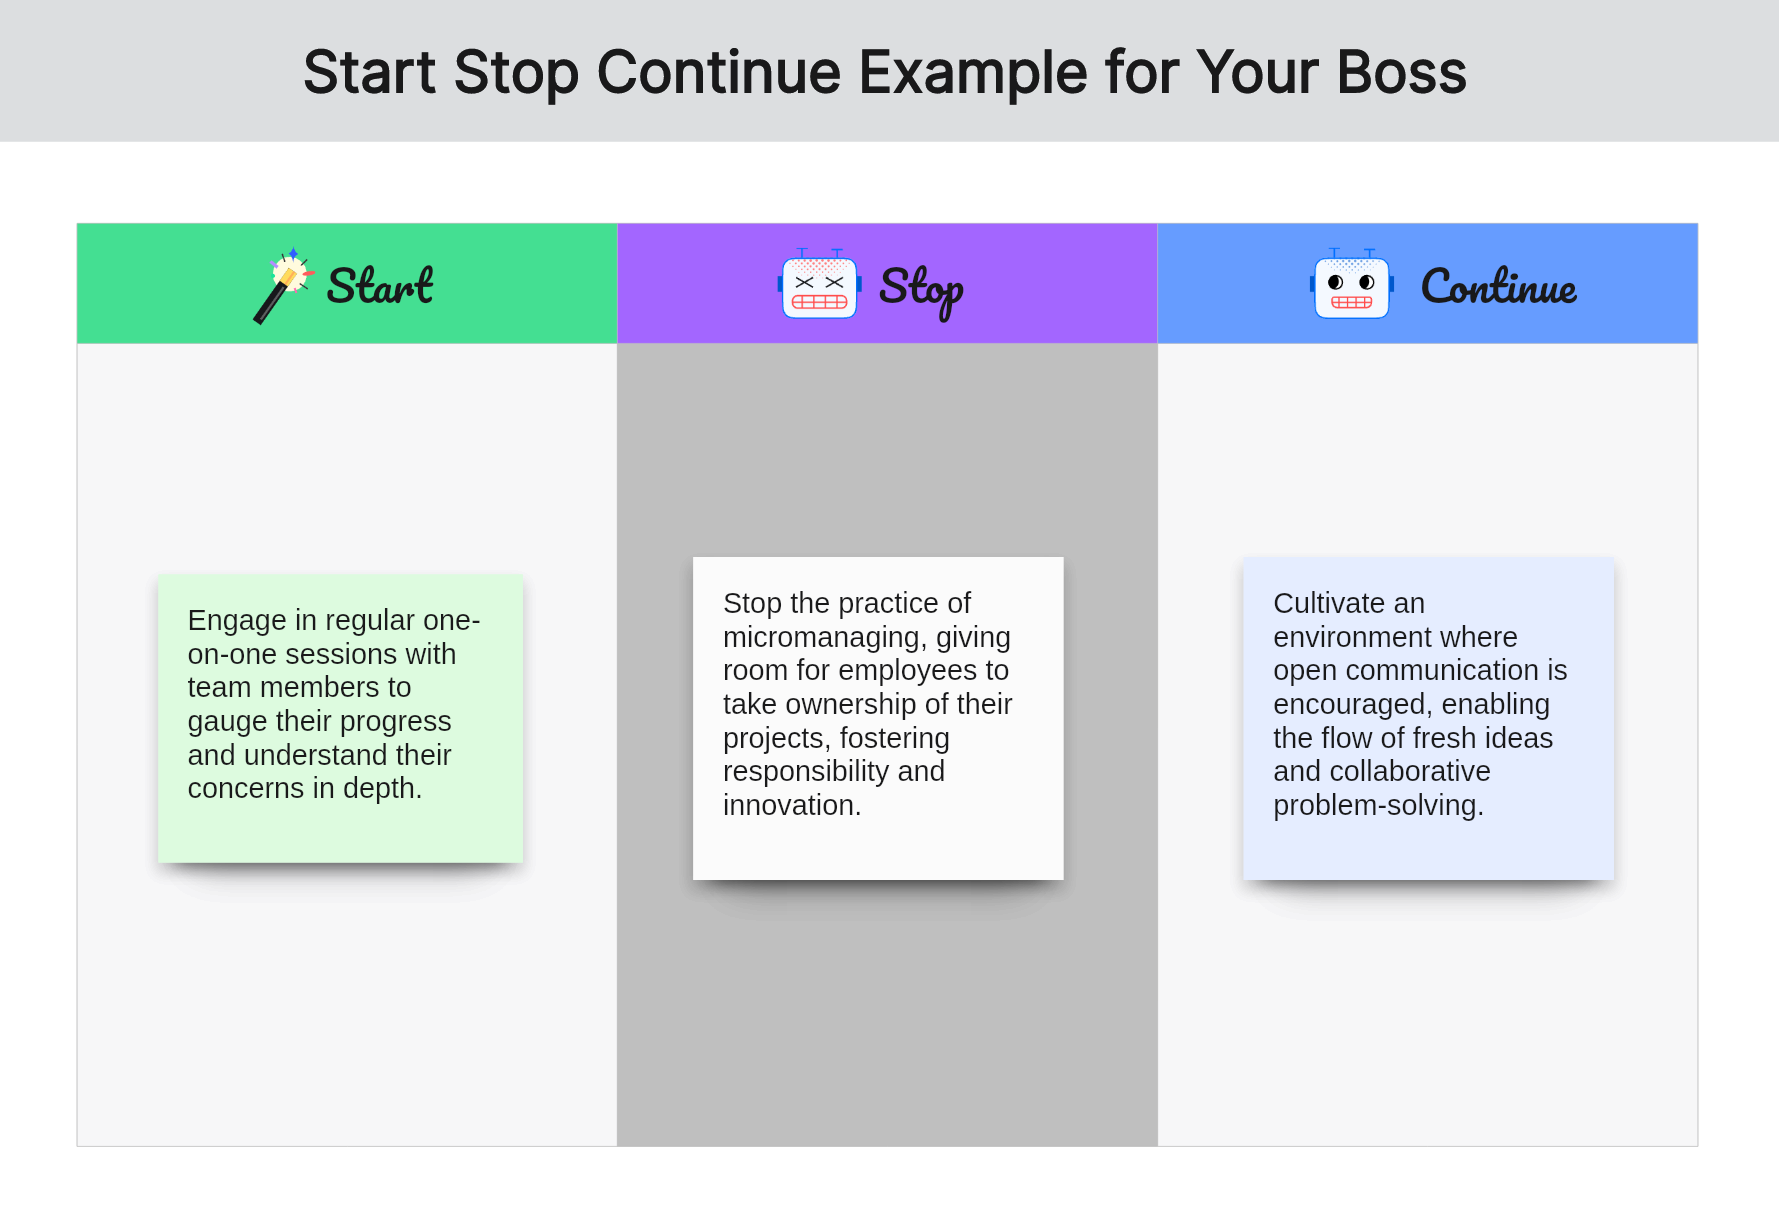 start-stop-continue-examples-for-boss-01